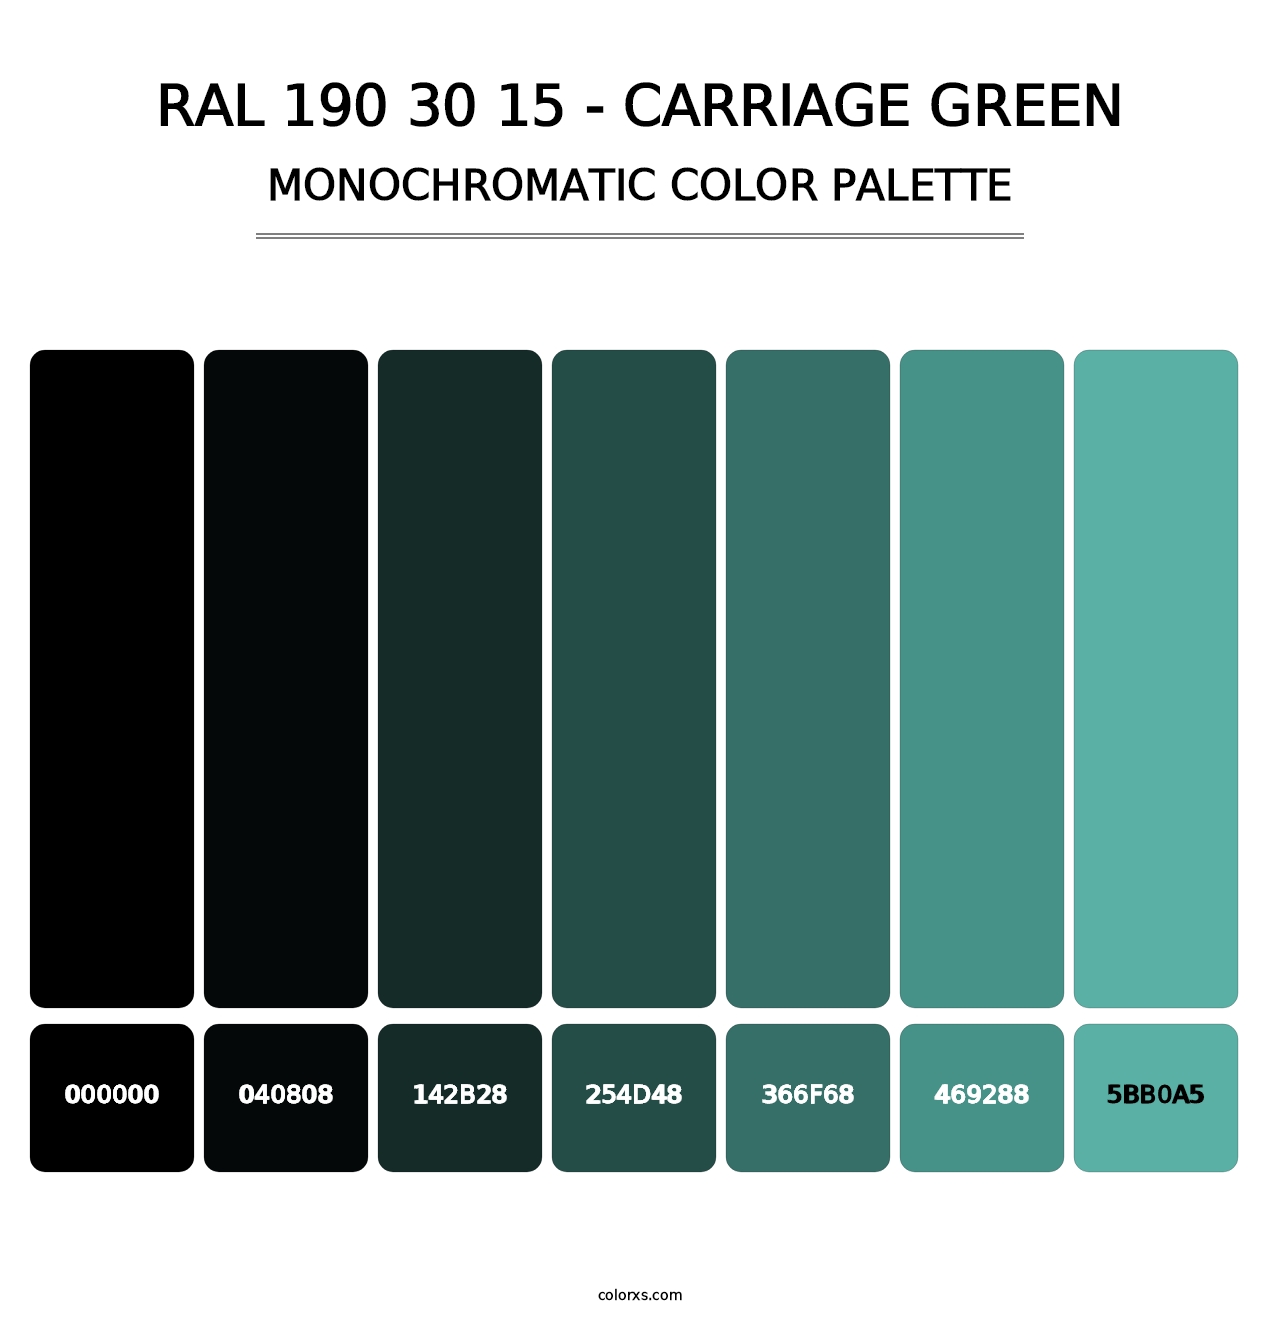 RAL 190 30 15 - Carriage Green - Monochromatic Color Palette